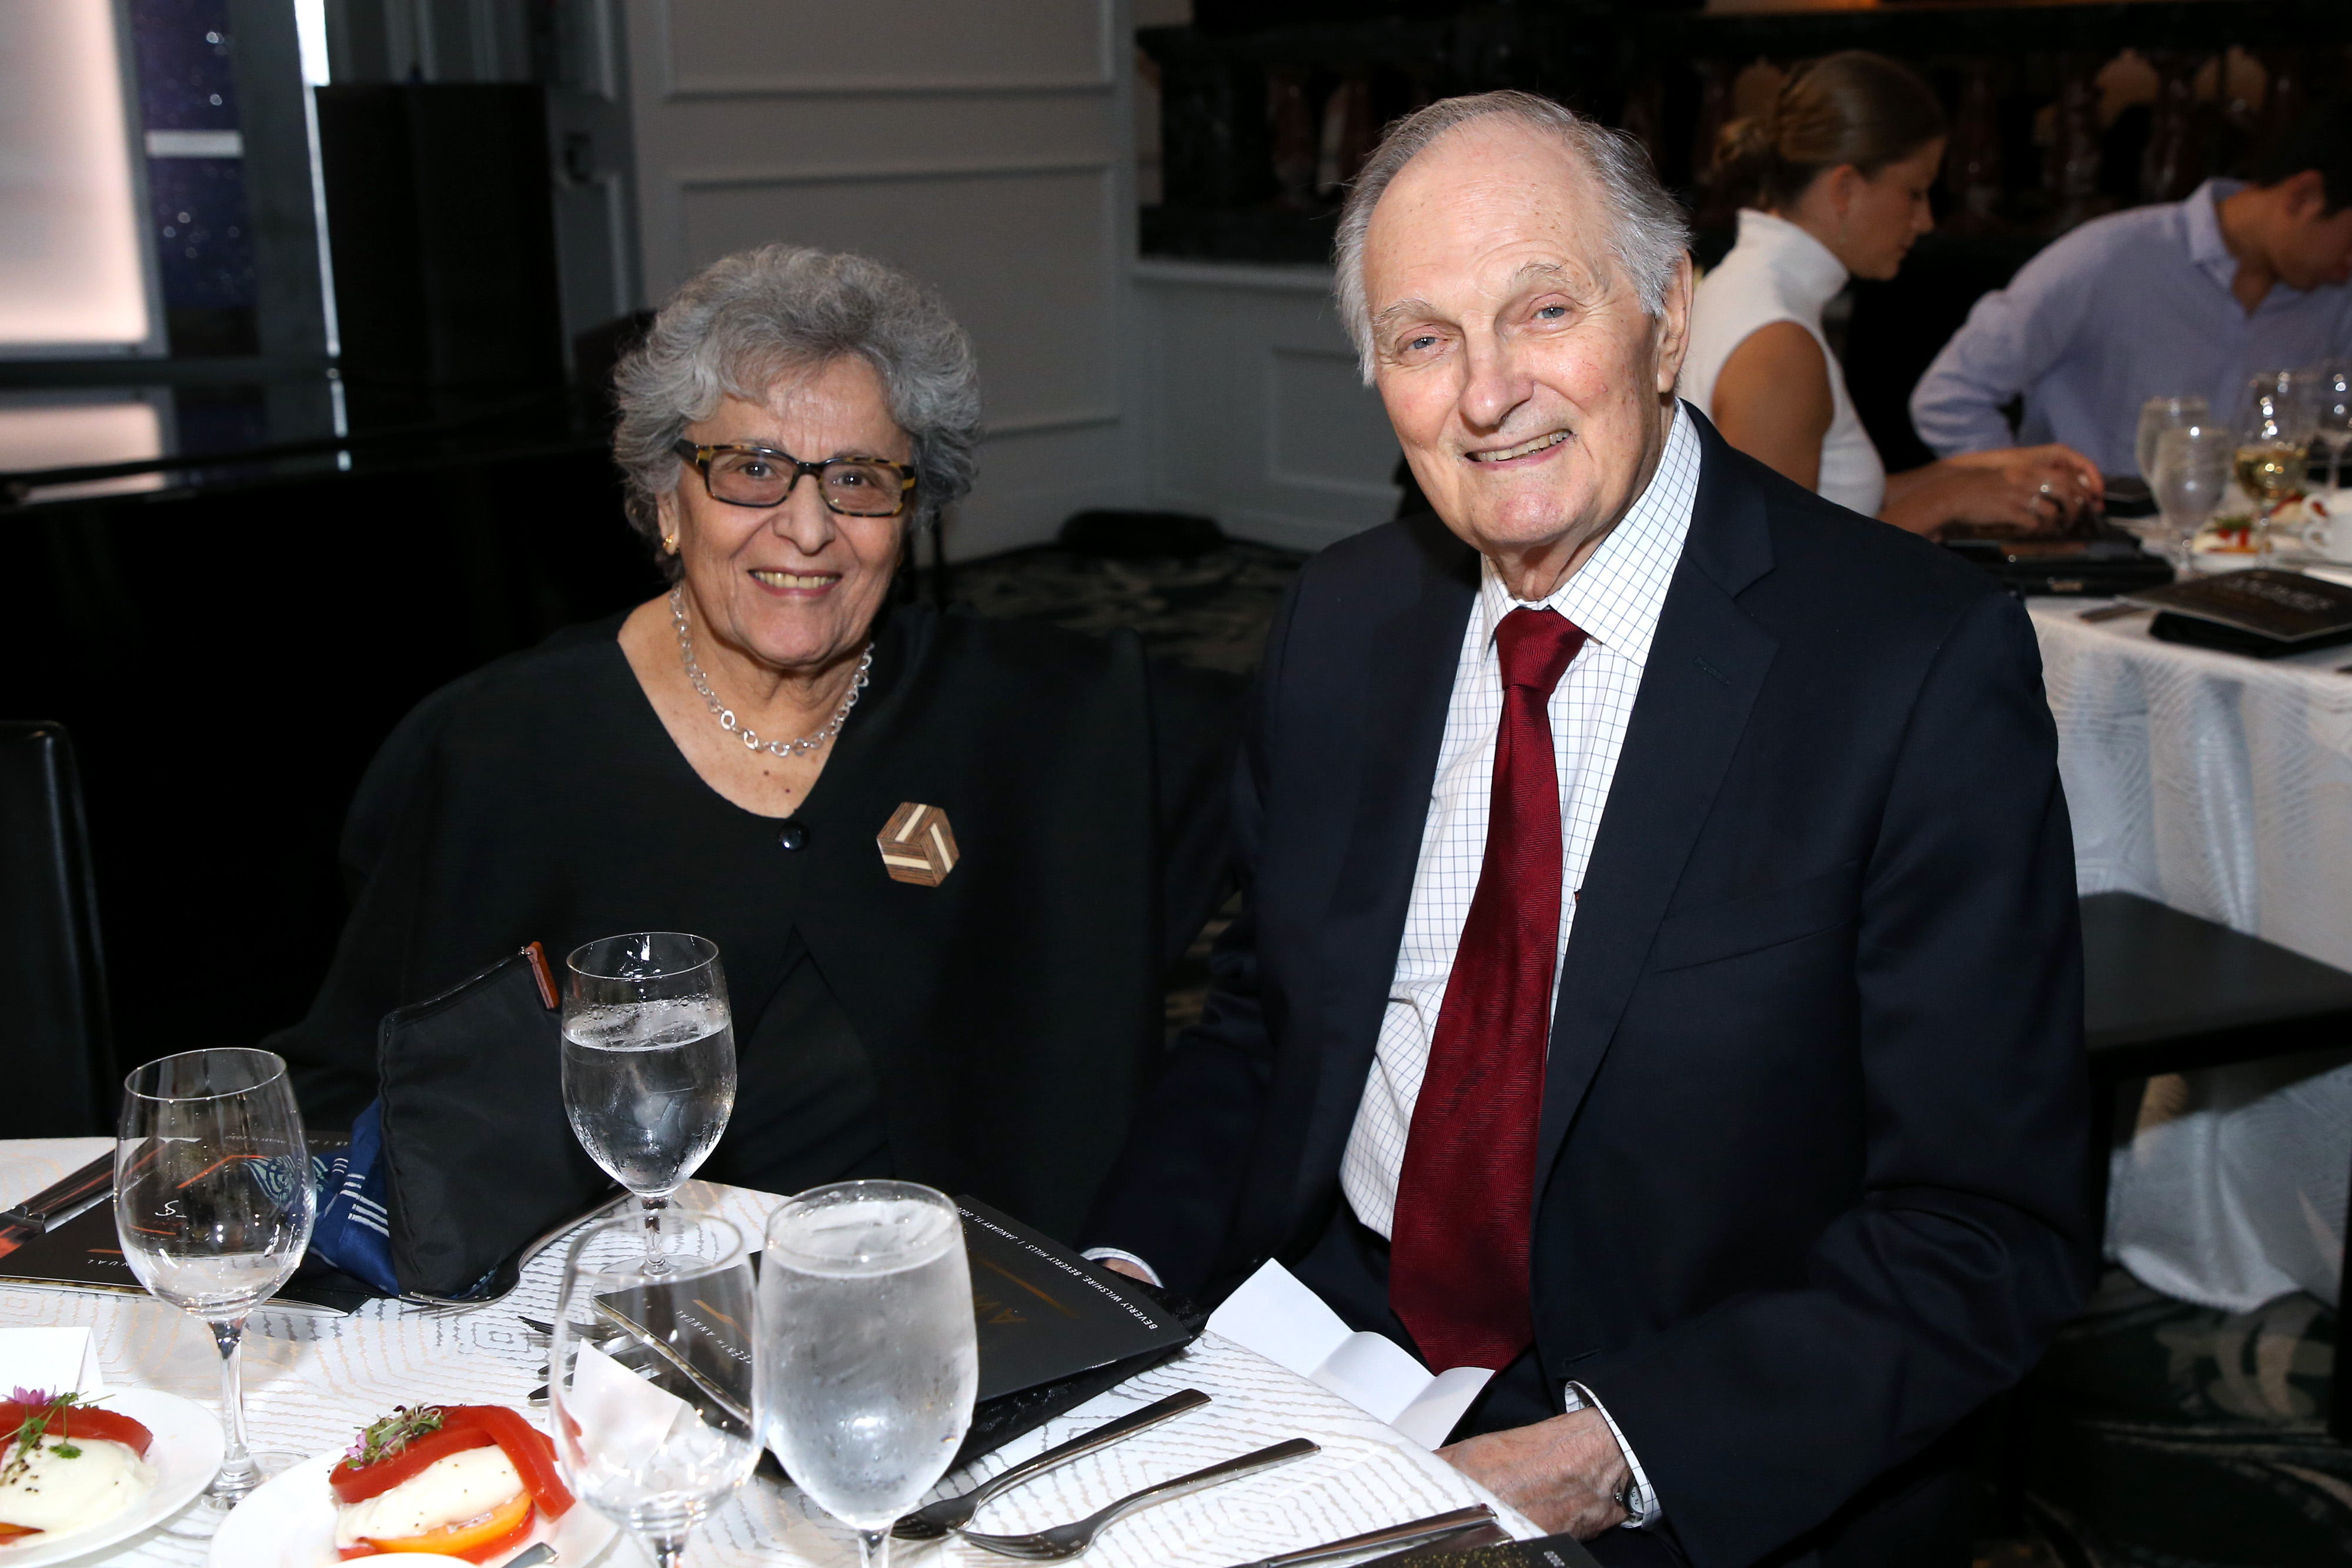 Arlene and Alan Alda at AARP The Magazine's 19th Annual Movies For Grownups Awards on January 11, 2020, in Beverly Hills, California | Source: Getty Images